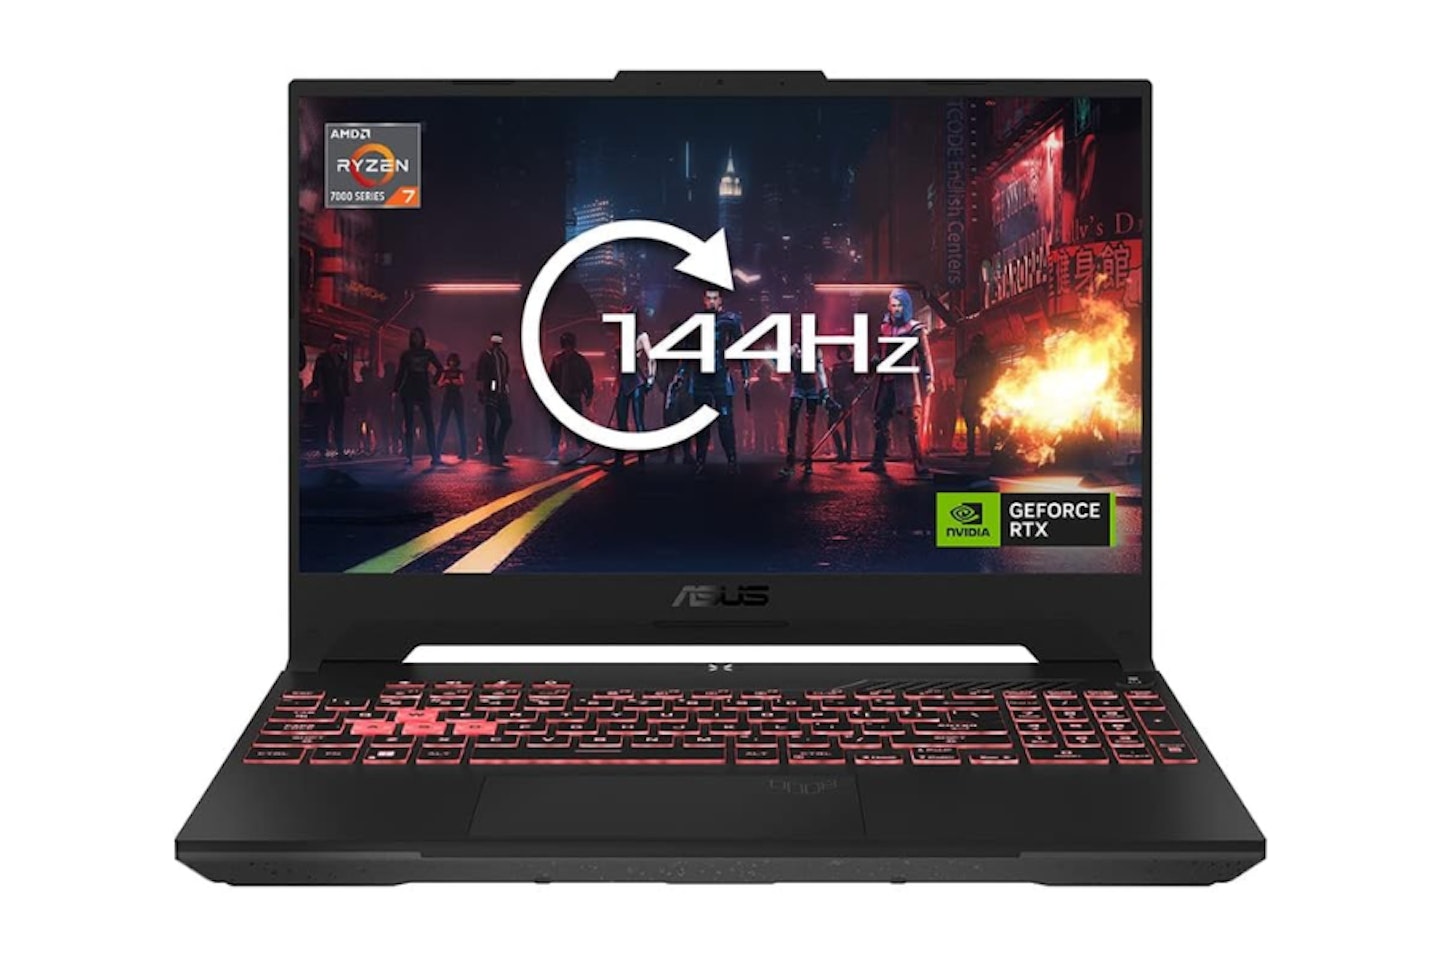 TOP 80 Games for Low End PCs and Laptops (2GB RAM/ Intel HD Graphics) 